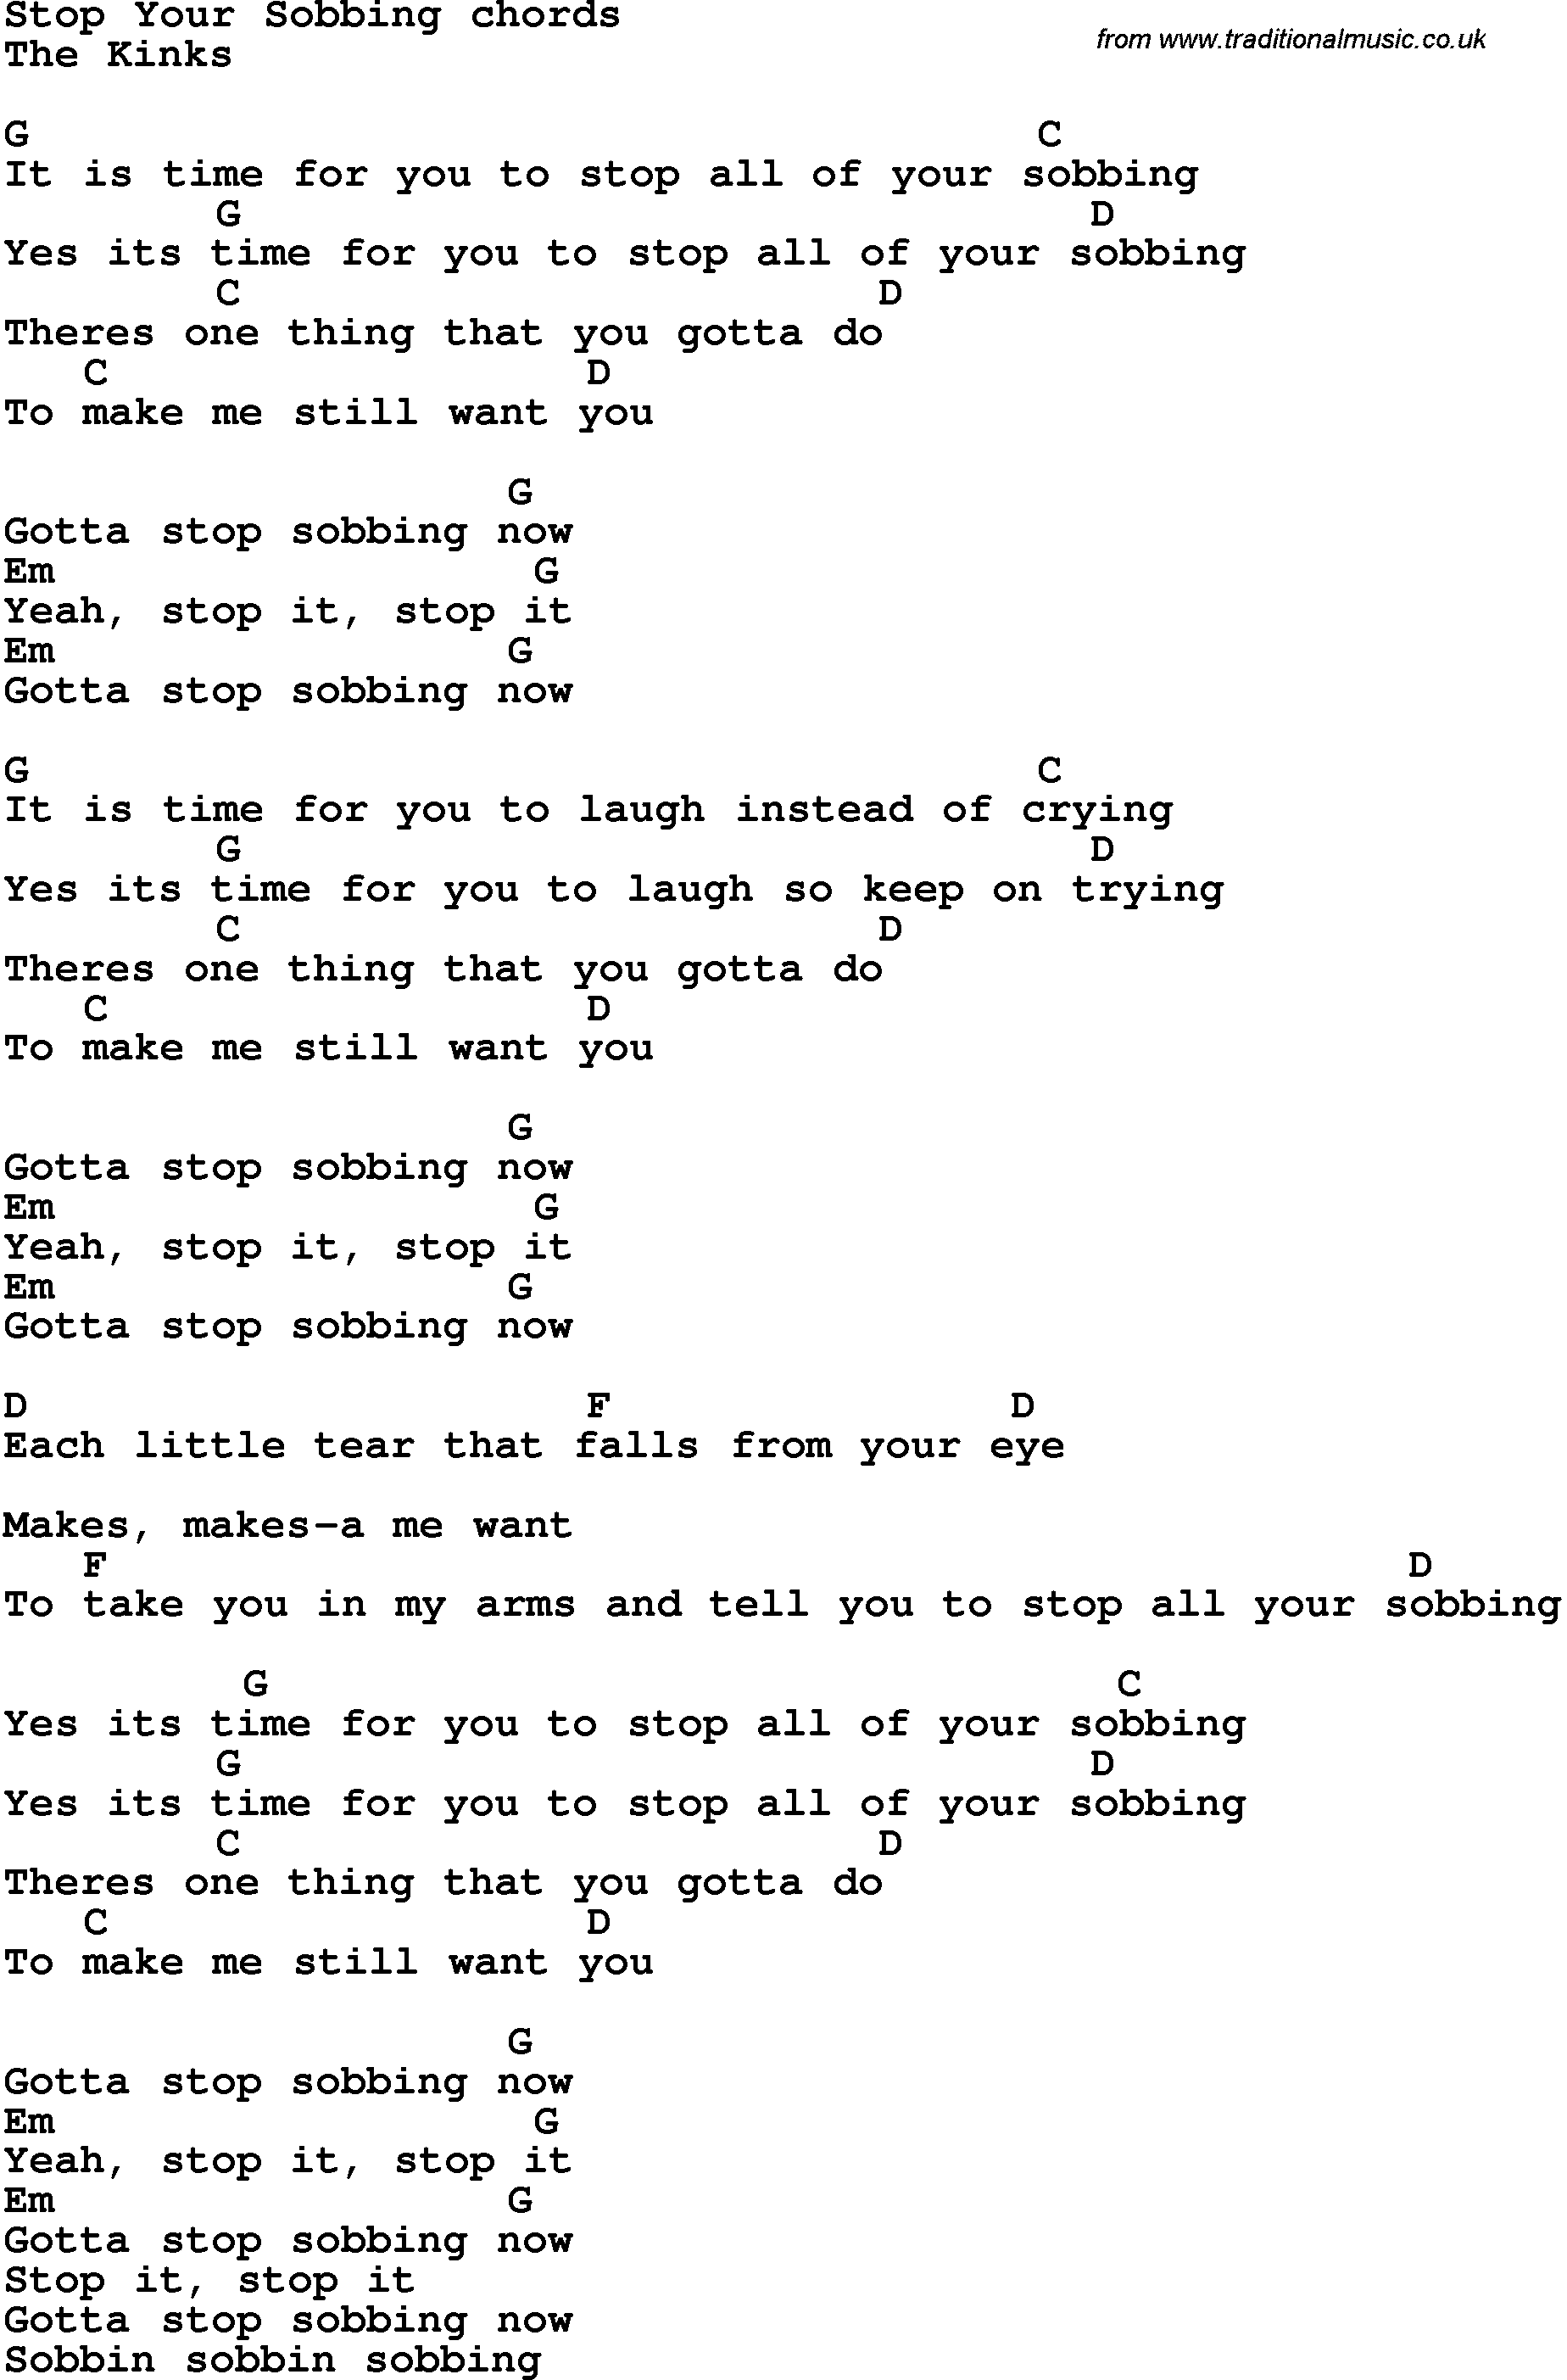 Song Lyrics with guitar chords for Stop Your Sobbing